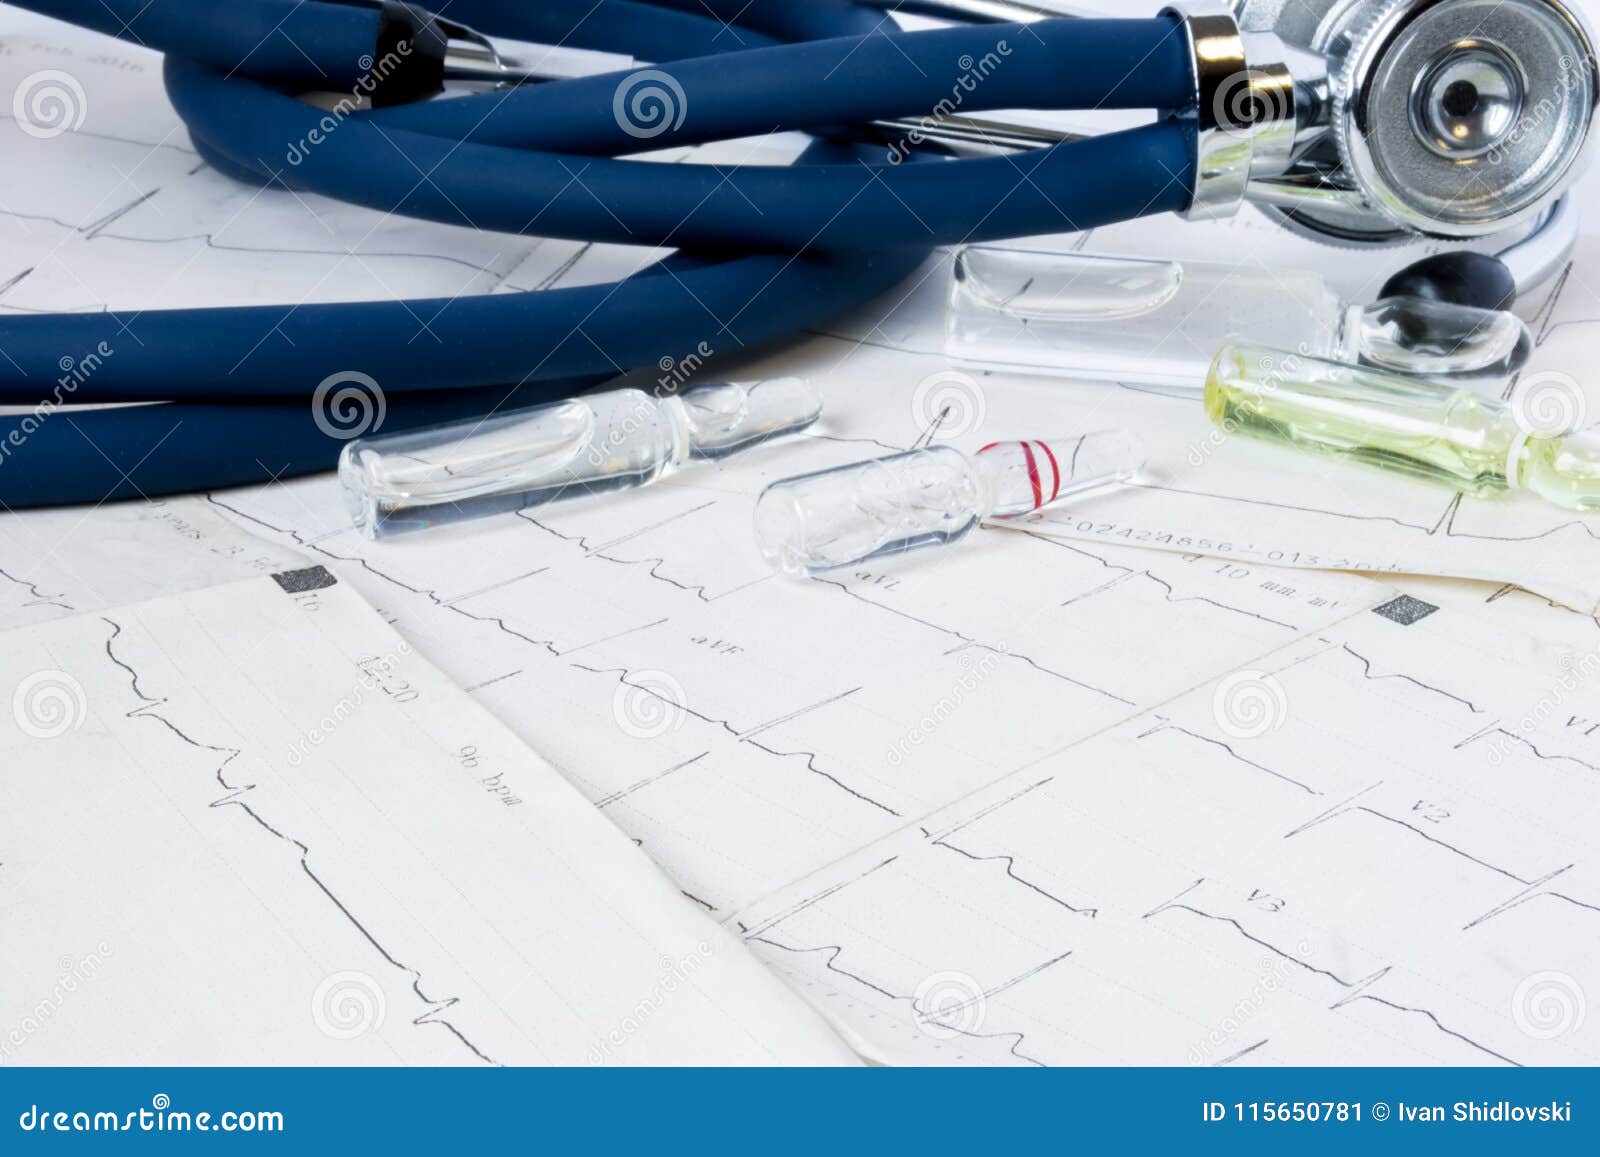 concept photo treatment of cardiovascular disease arrhythmias cardiac conduction system, recovery and relief of life-threatening c